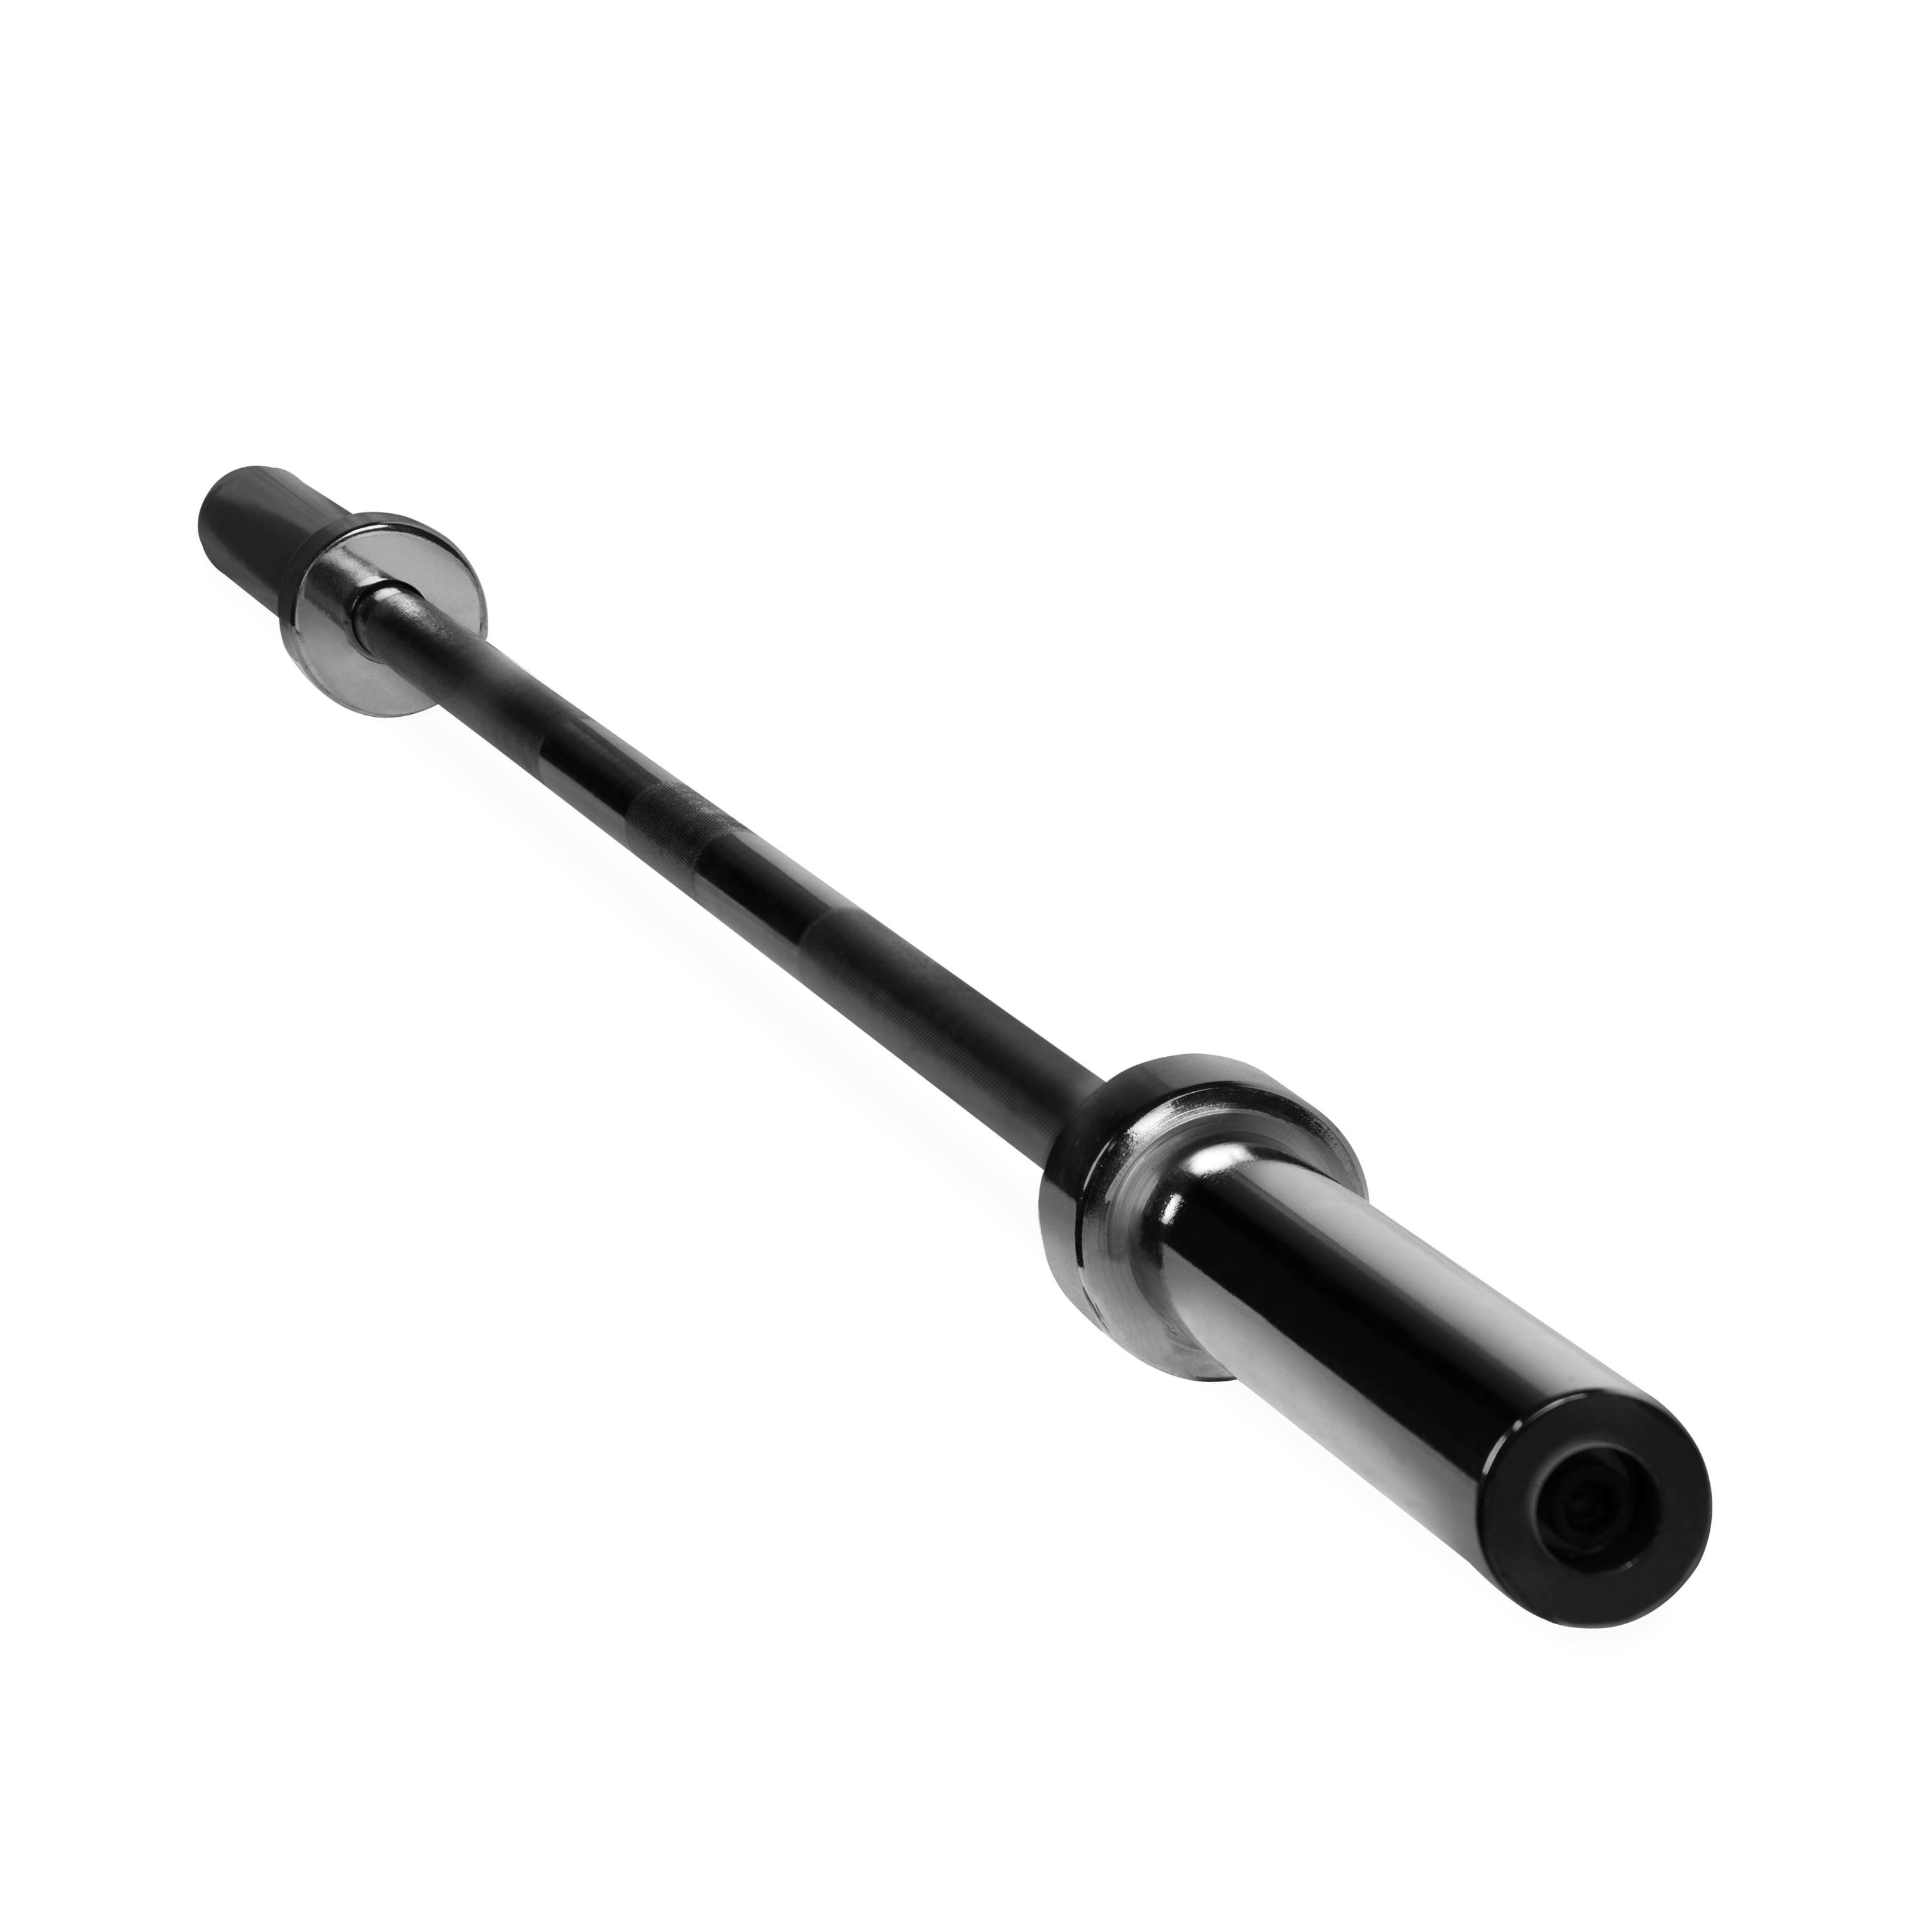 CAP Barbell 2-inch Olympic 6 FT Weight Bar Black for sale online 